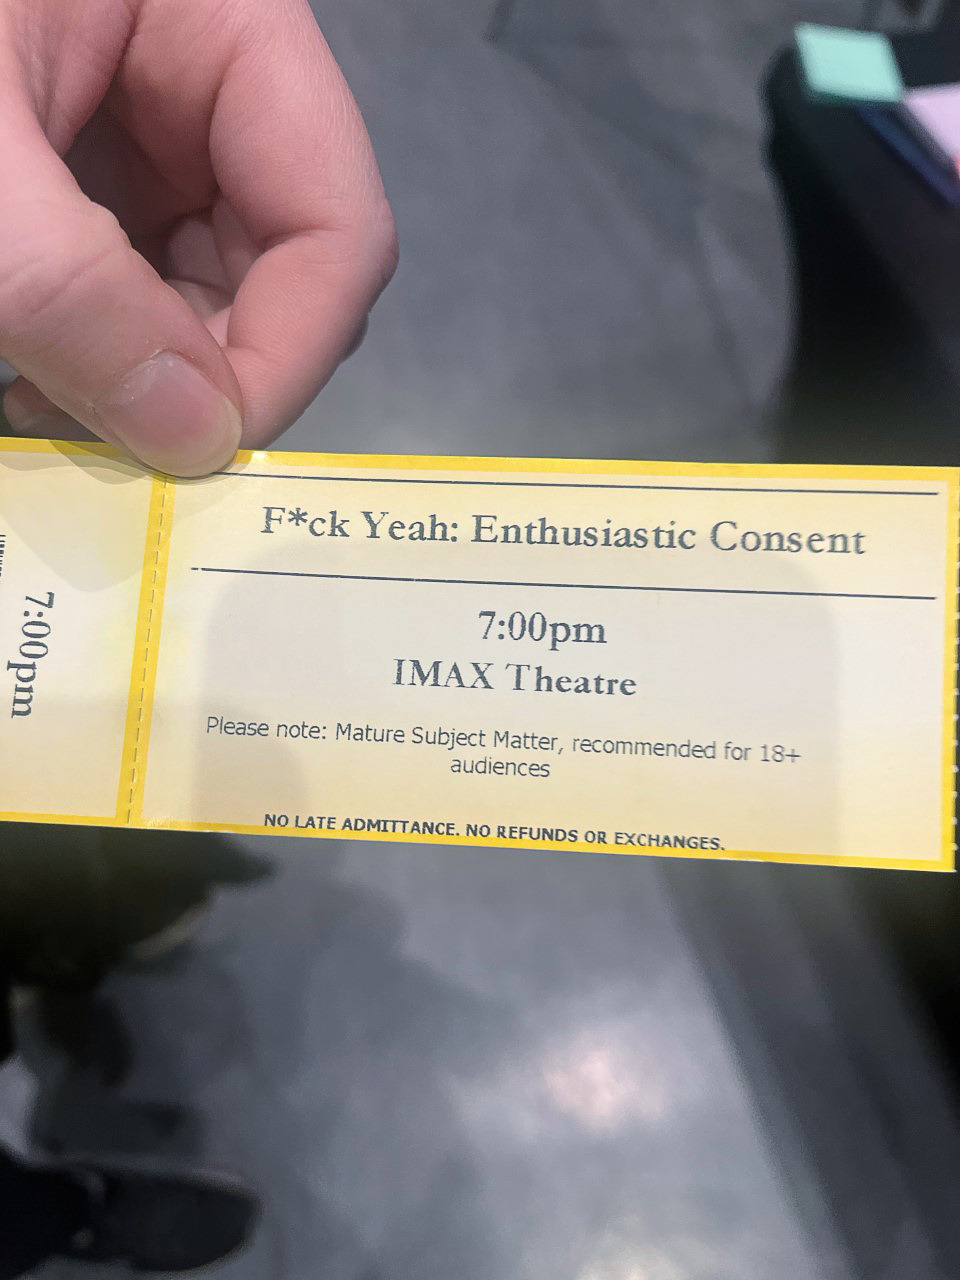 A person holding up an admission ticket to the event that reads "F*ck Yeah Enthusiastic Consent" 7:00pm IMAX Theatre